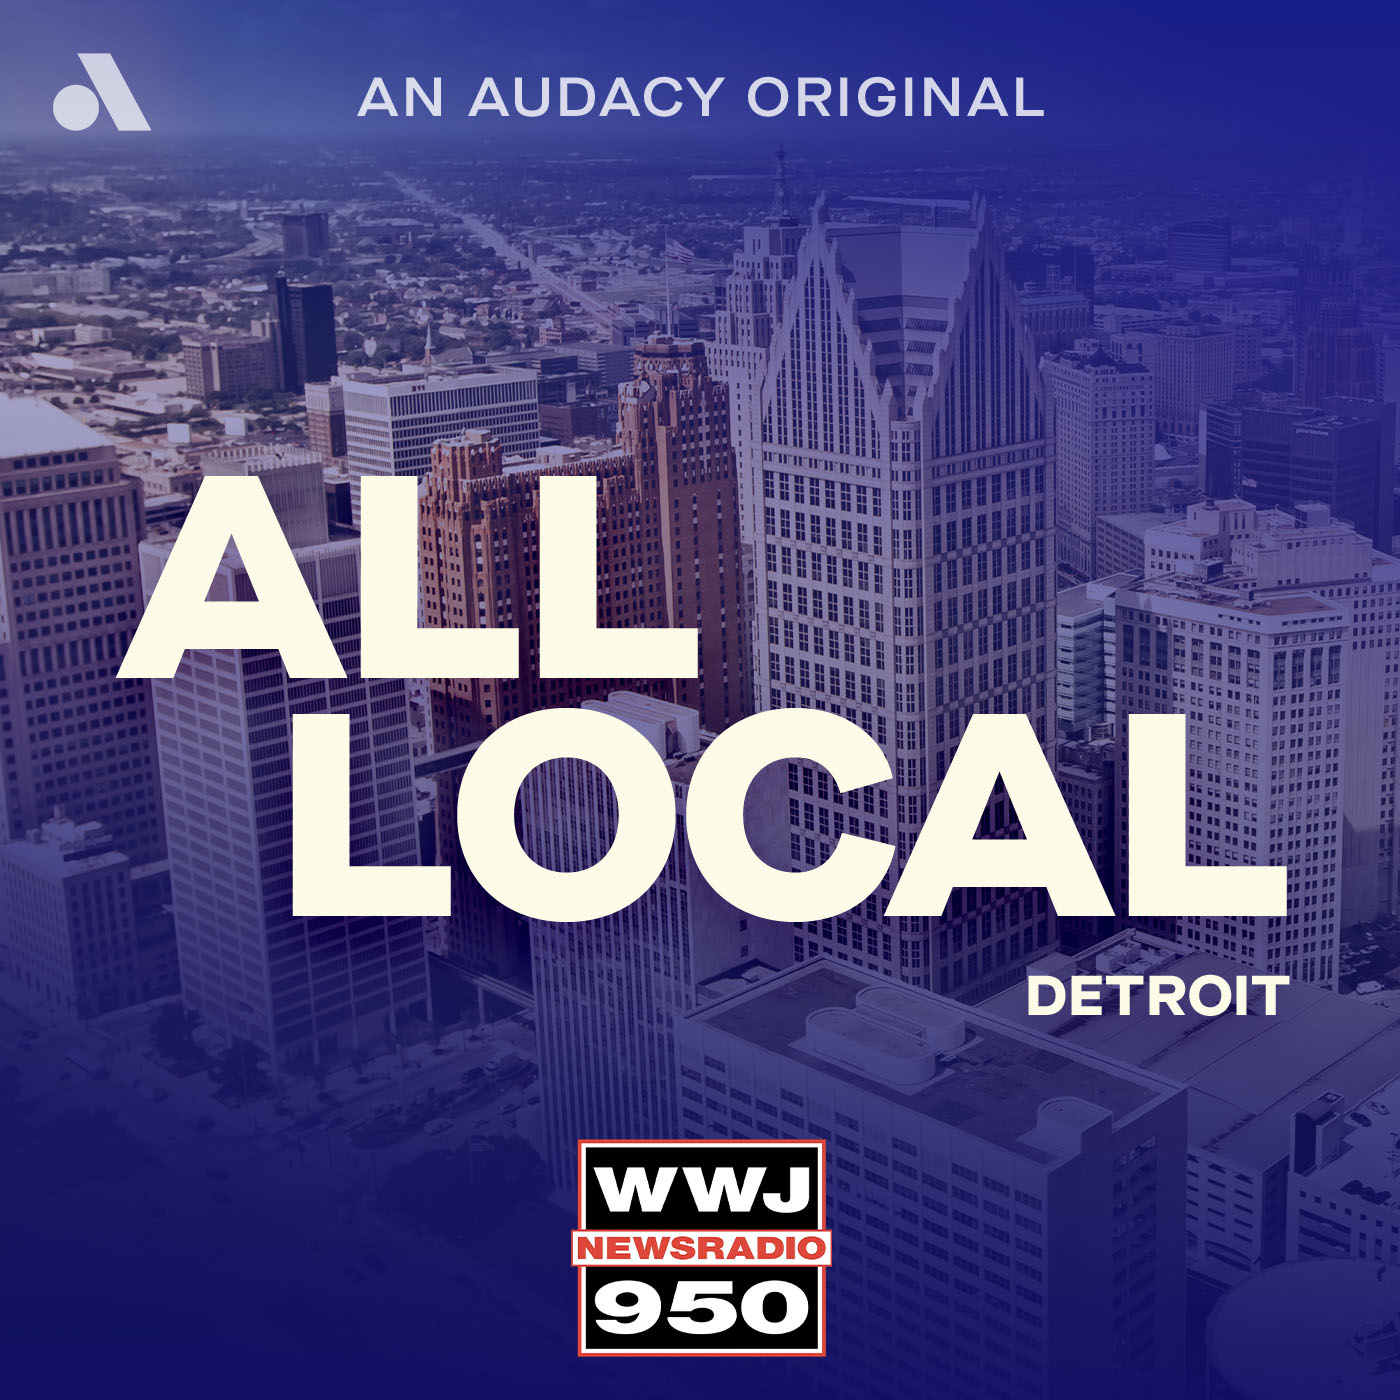 RAW AUDIO: Man Speaks Out After Nephew Killed By Detroit Police